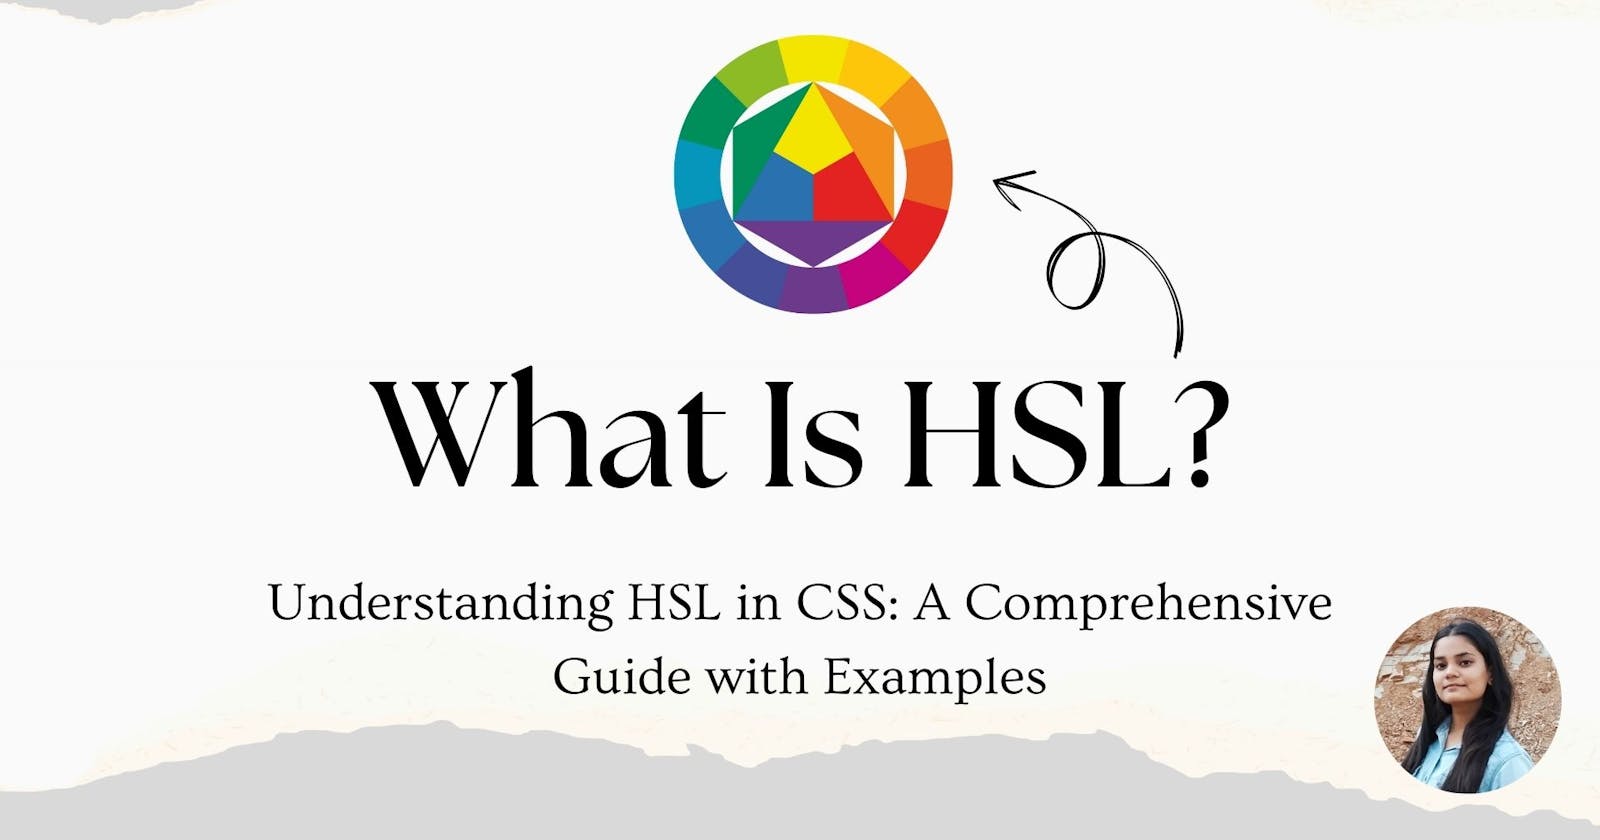 Understanding HSL in CSS: A Comprehensive Guide with Examples